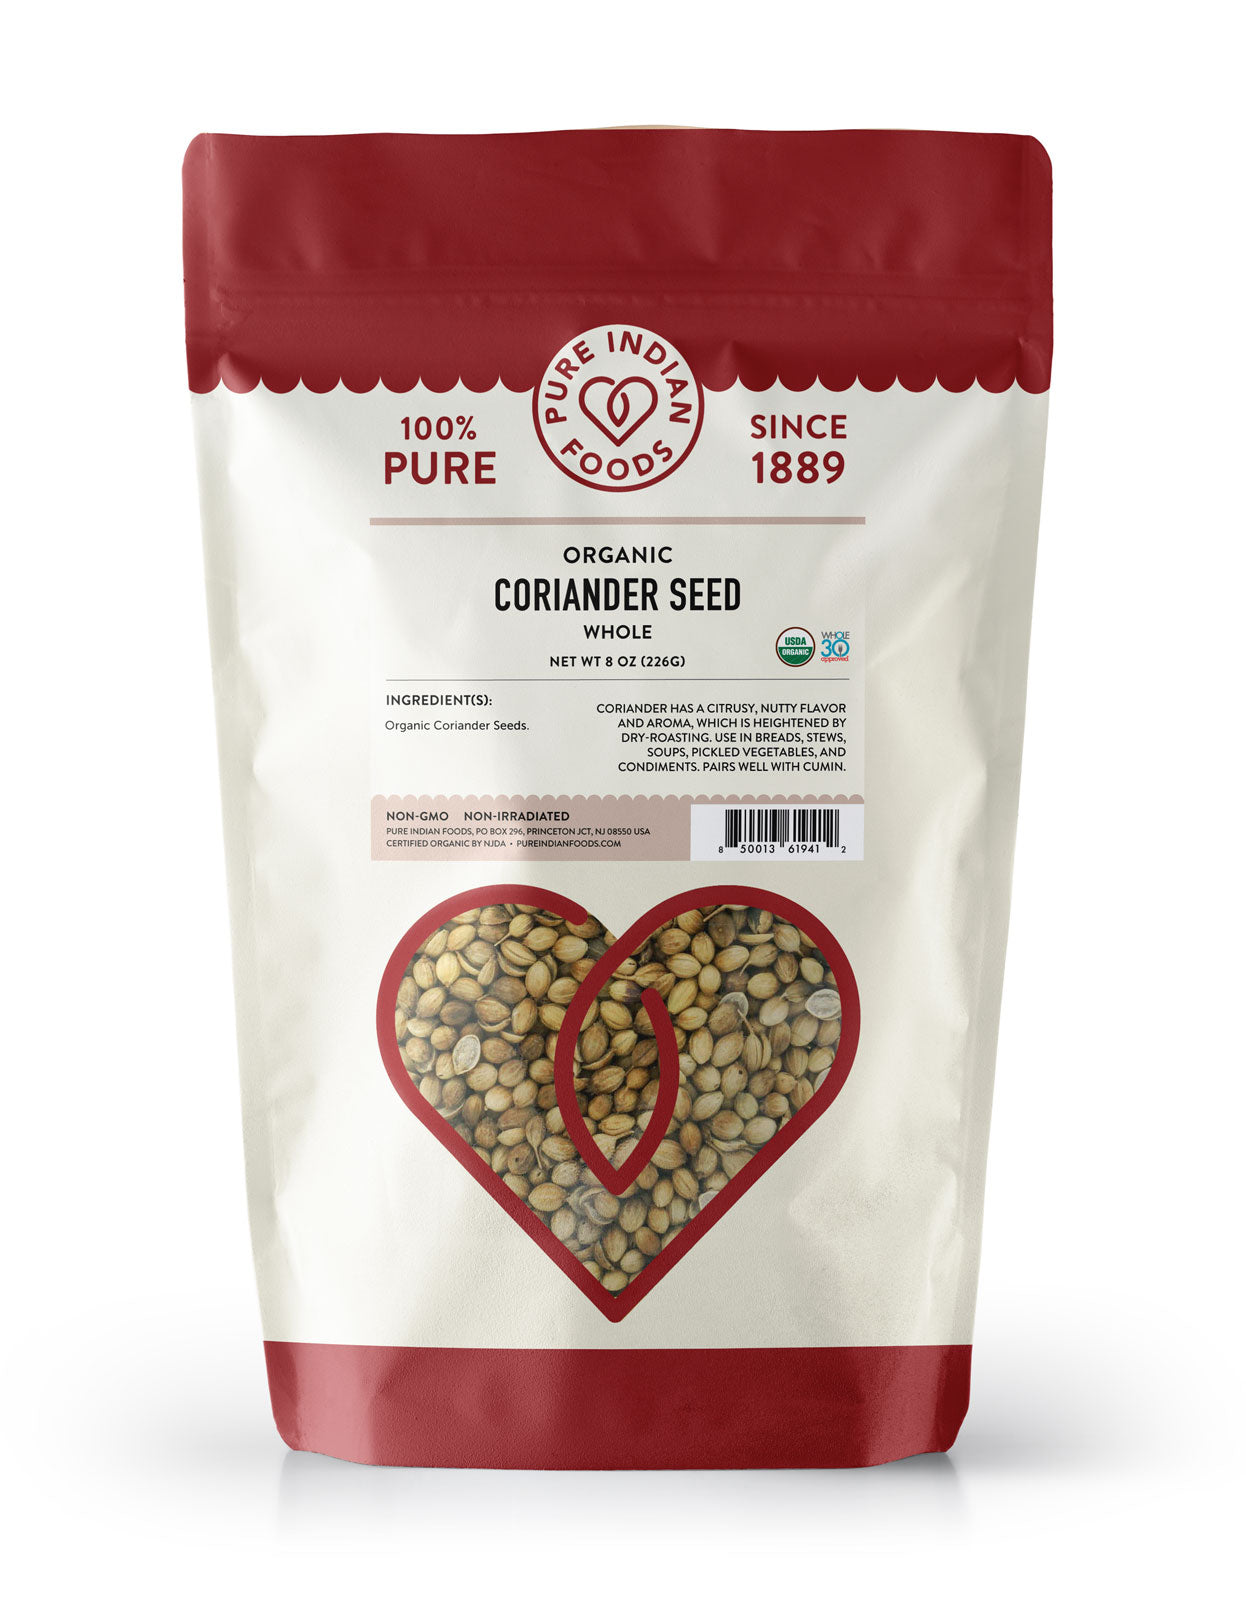 8oz bag of whole organic coriander seed from Pure Indian Foods